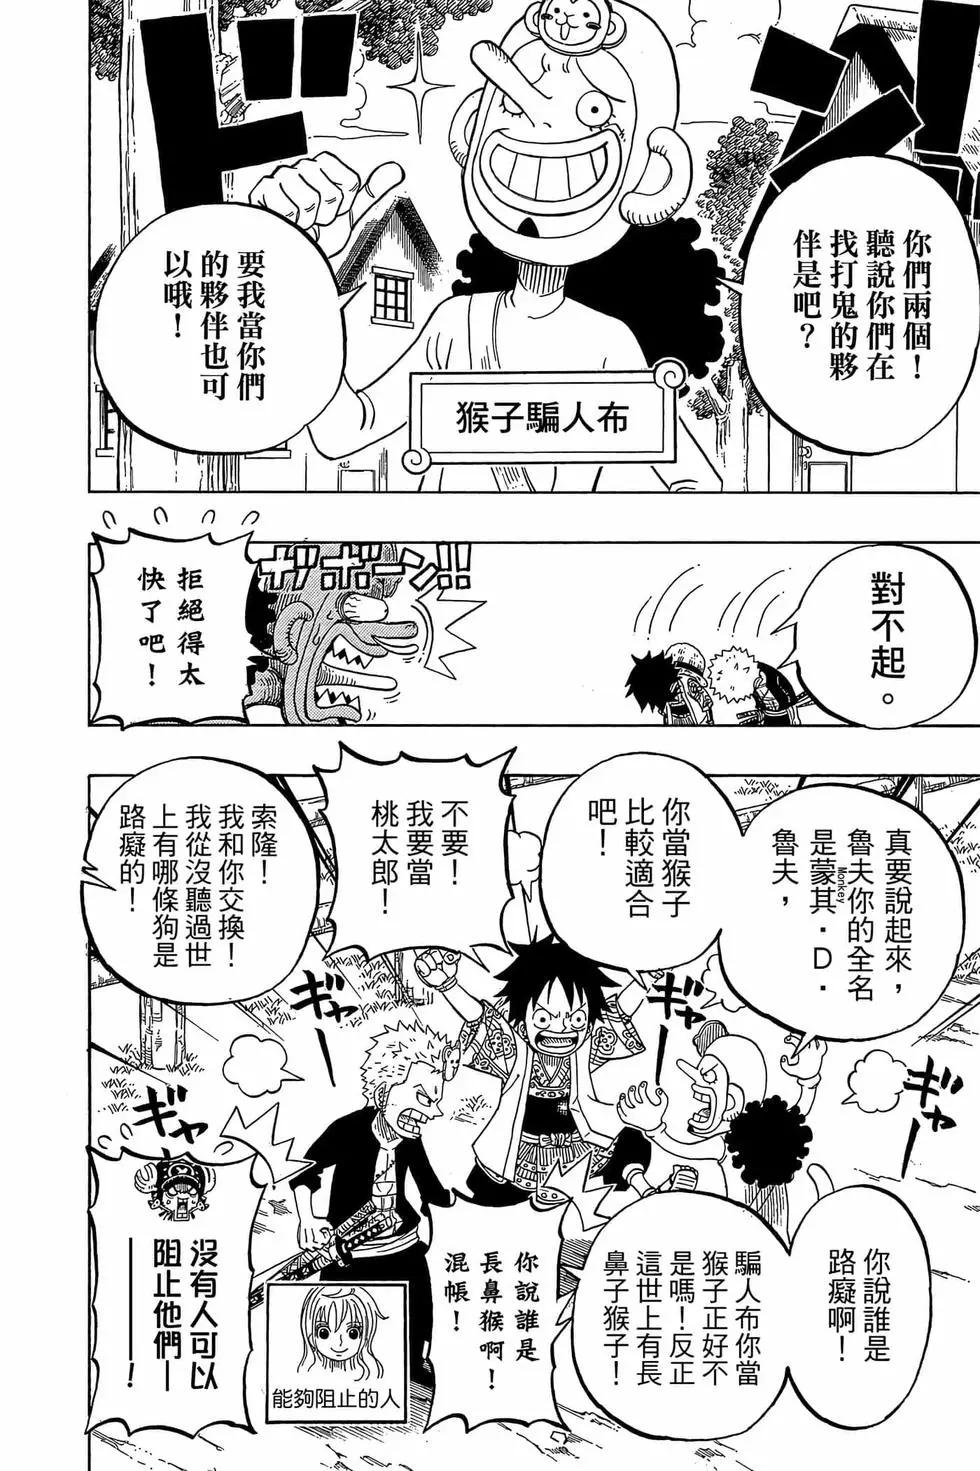 One piece party - 第01卷(2/4) - 3